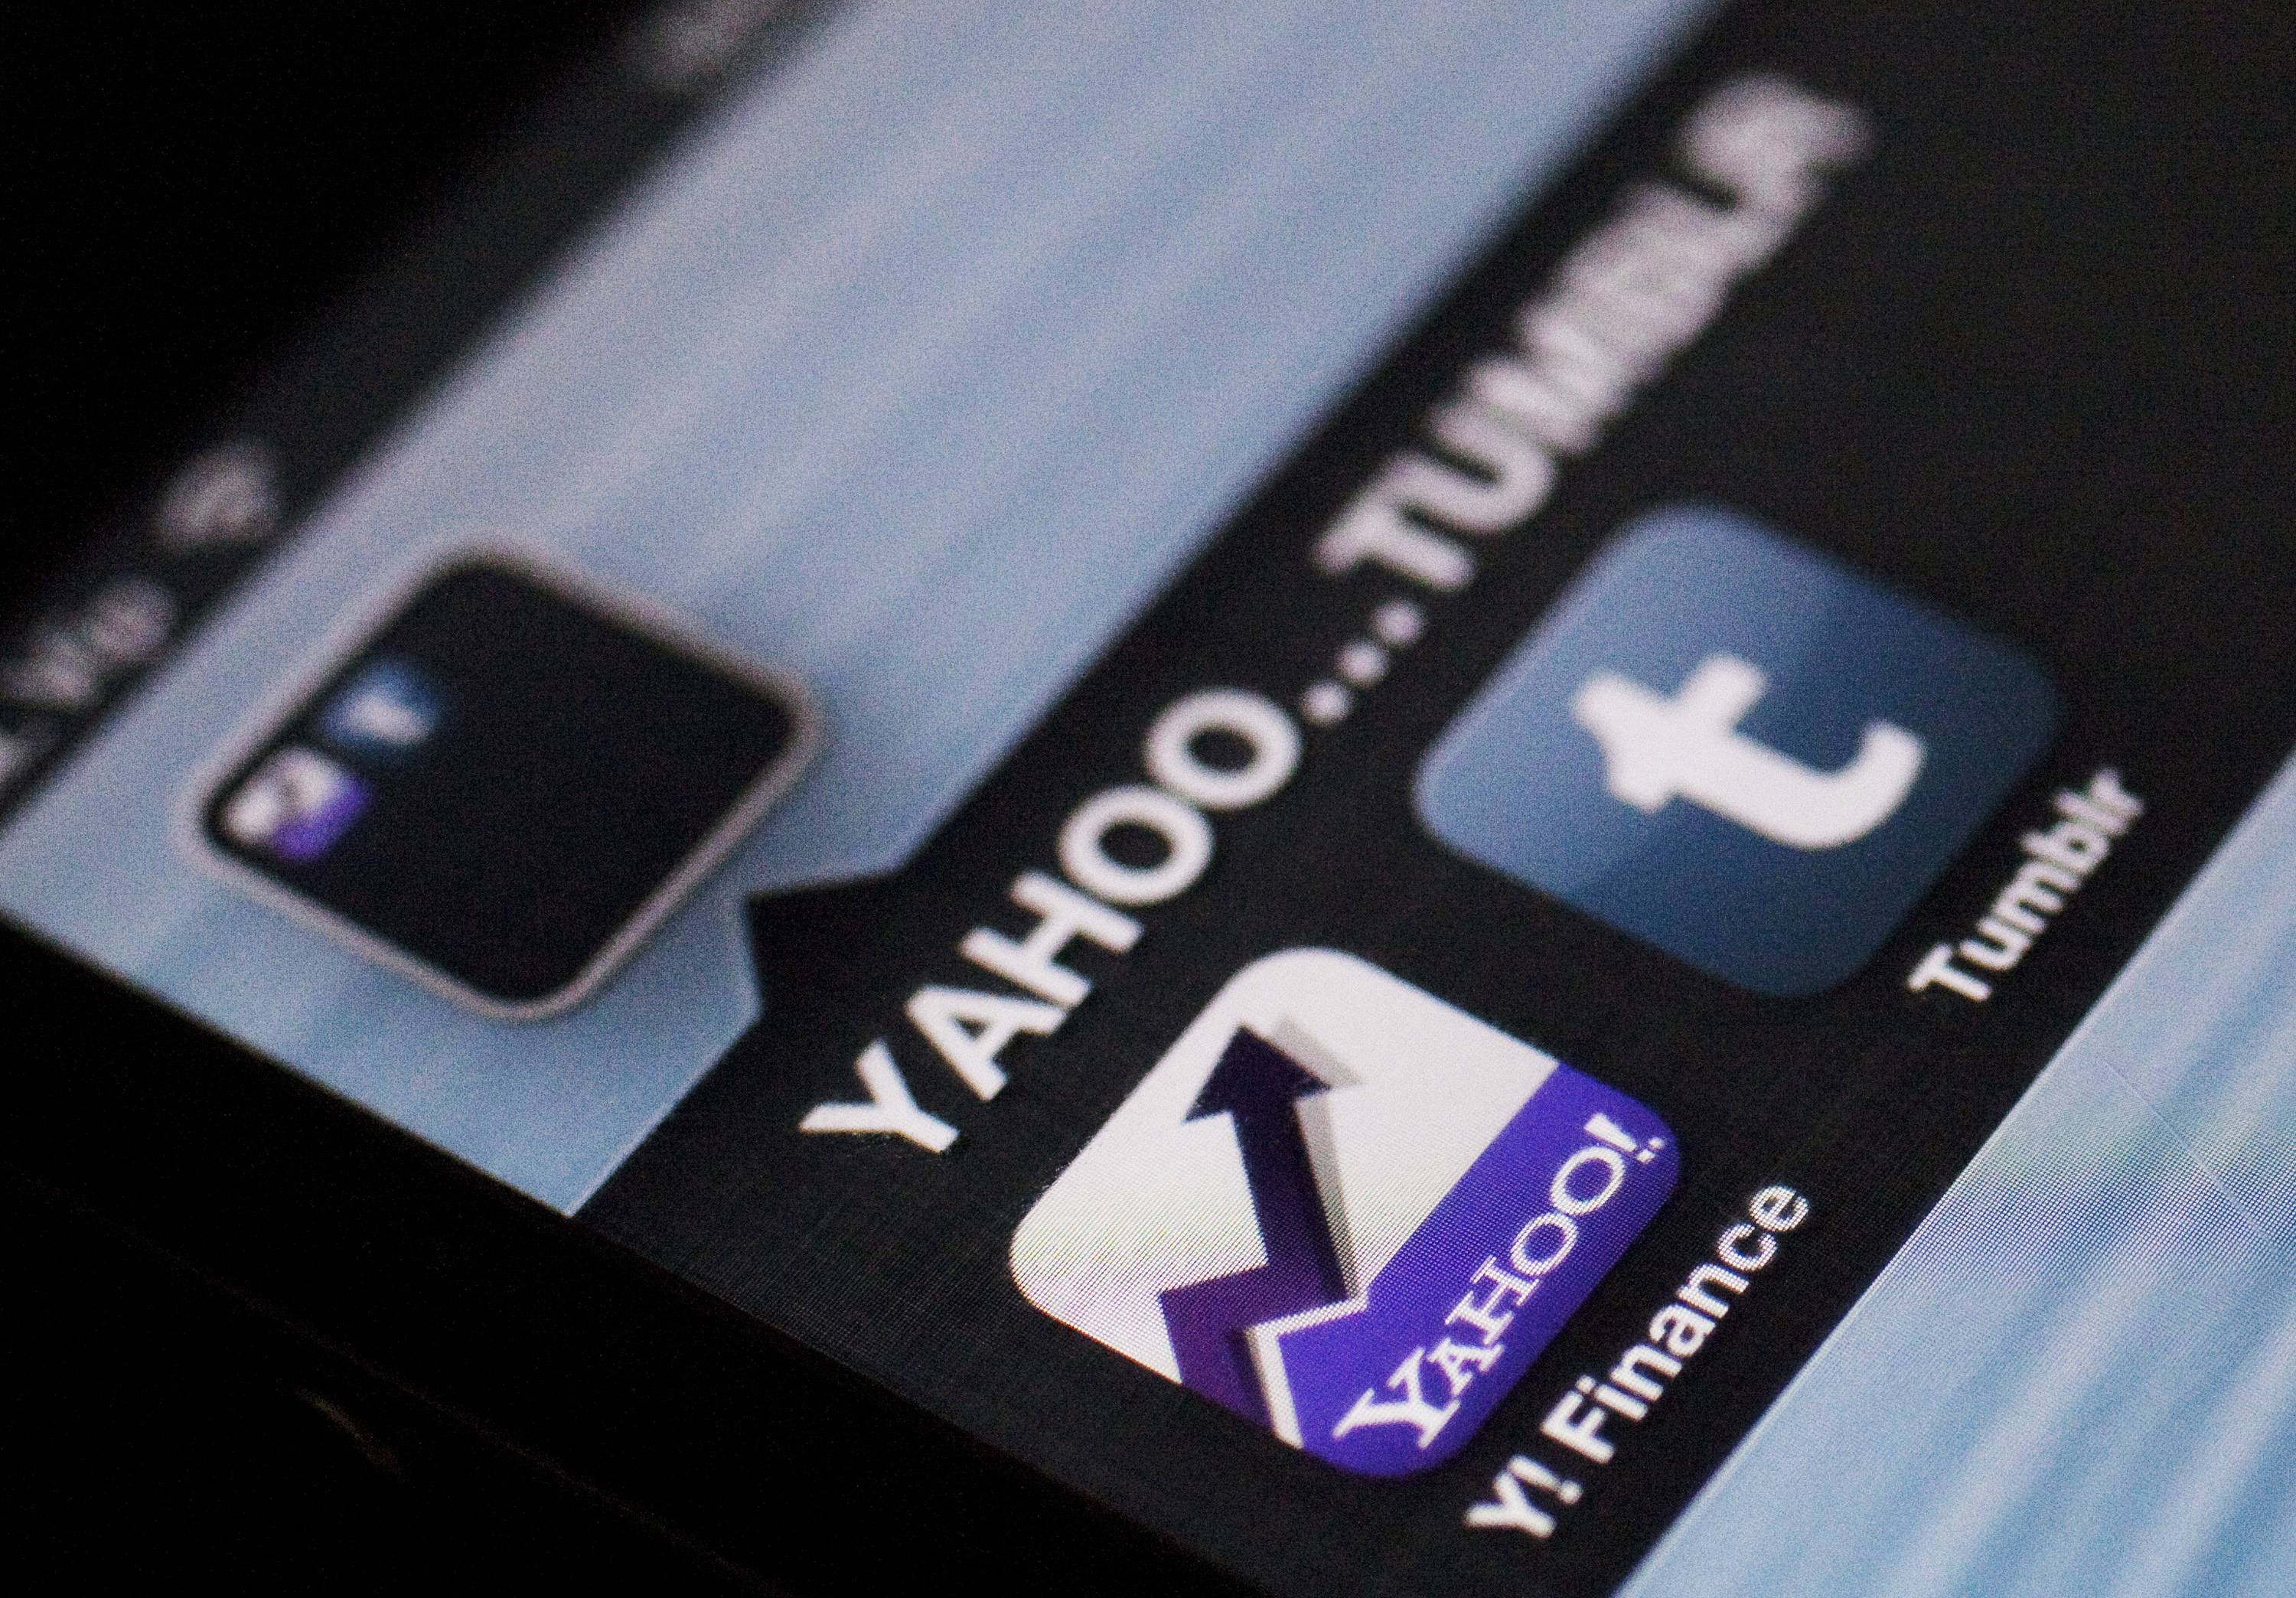 Yahoo reports 29,000 government data requests